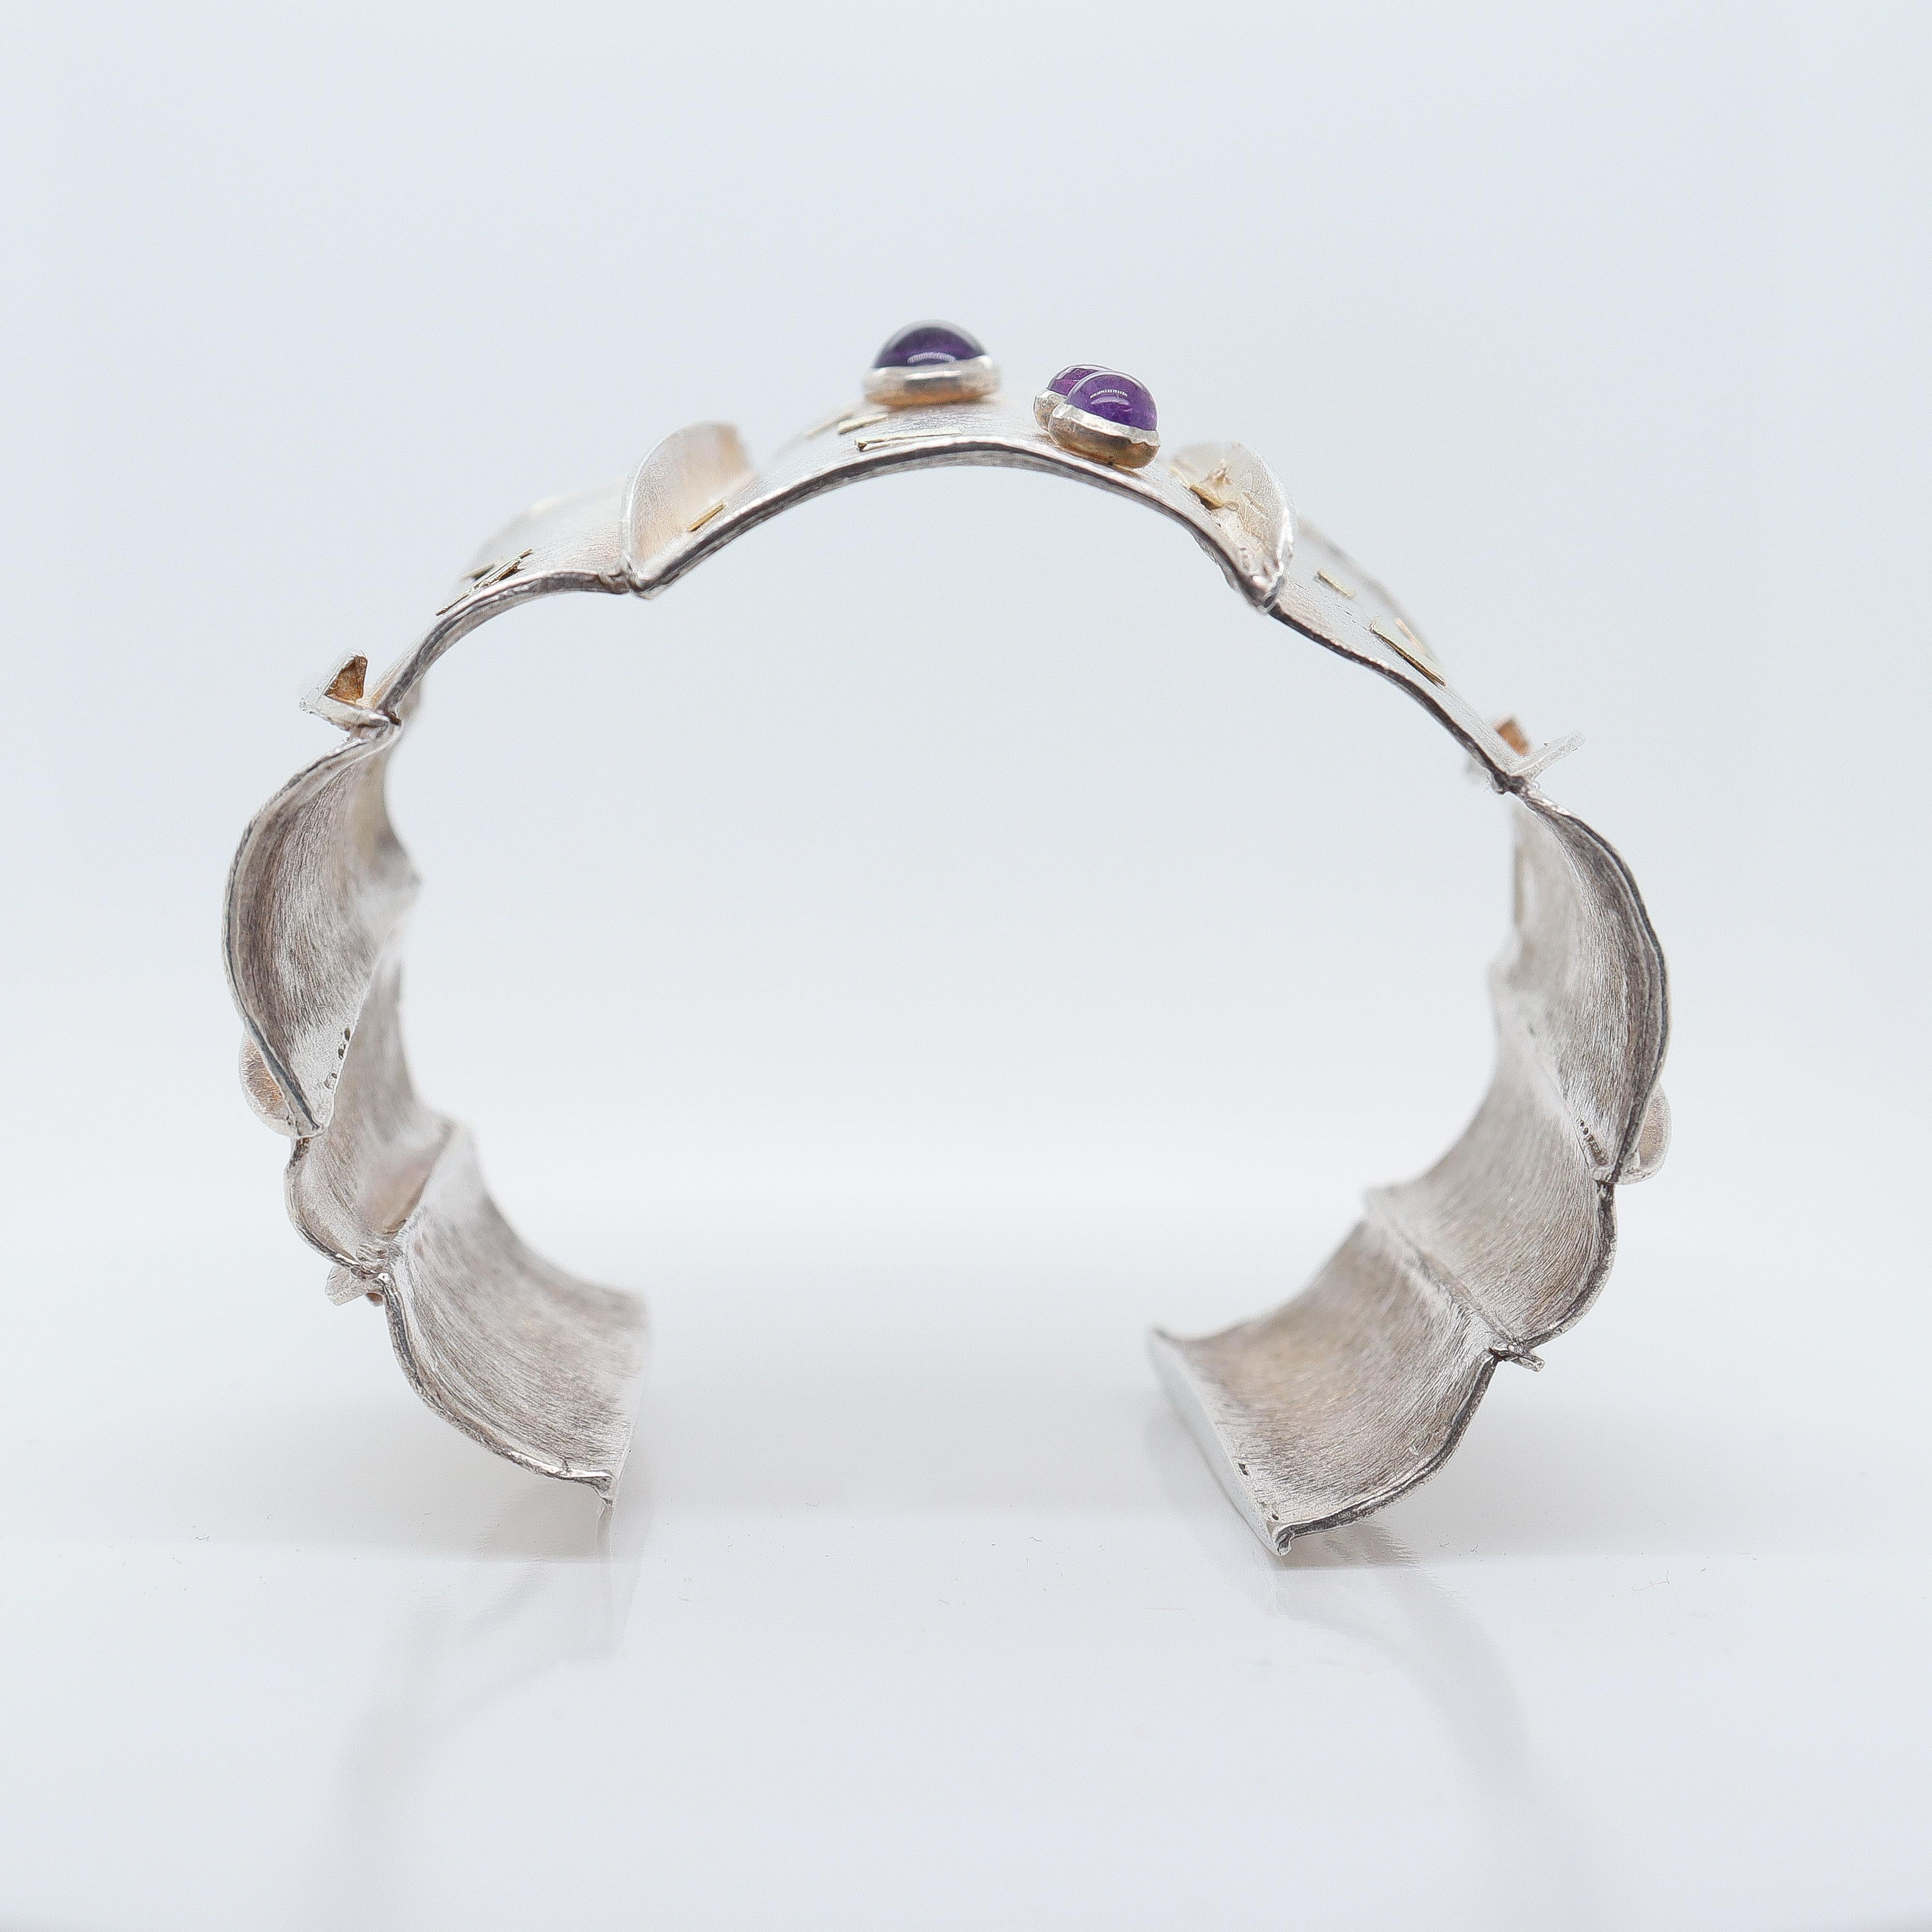 Modernist Silver, Gold, & Amethyst Cuff Bracelet Attributed to Enid Kaplan For Sale 1